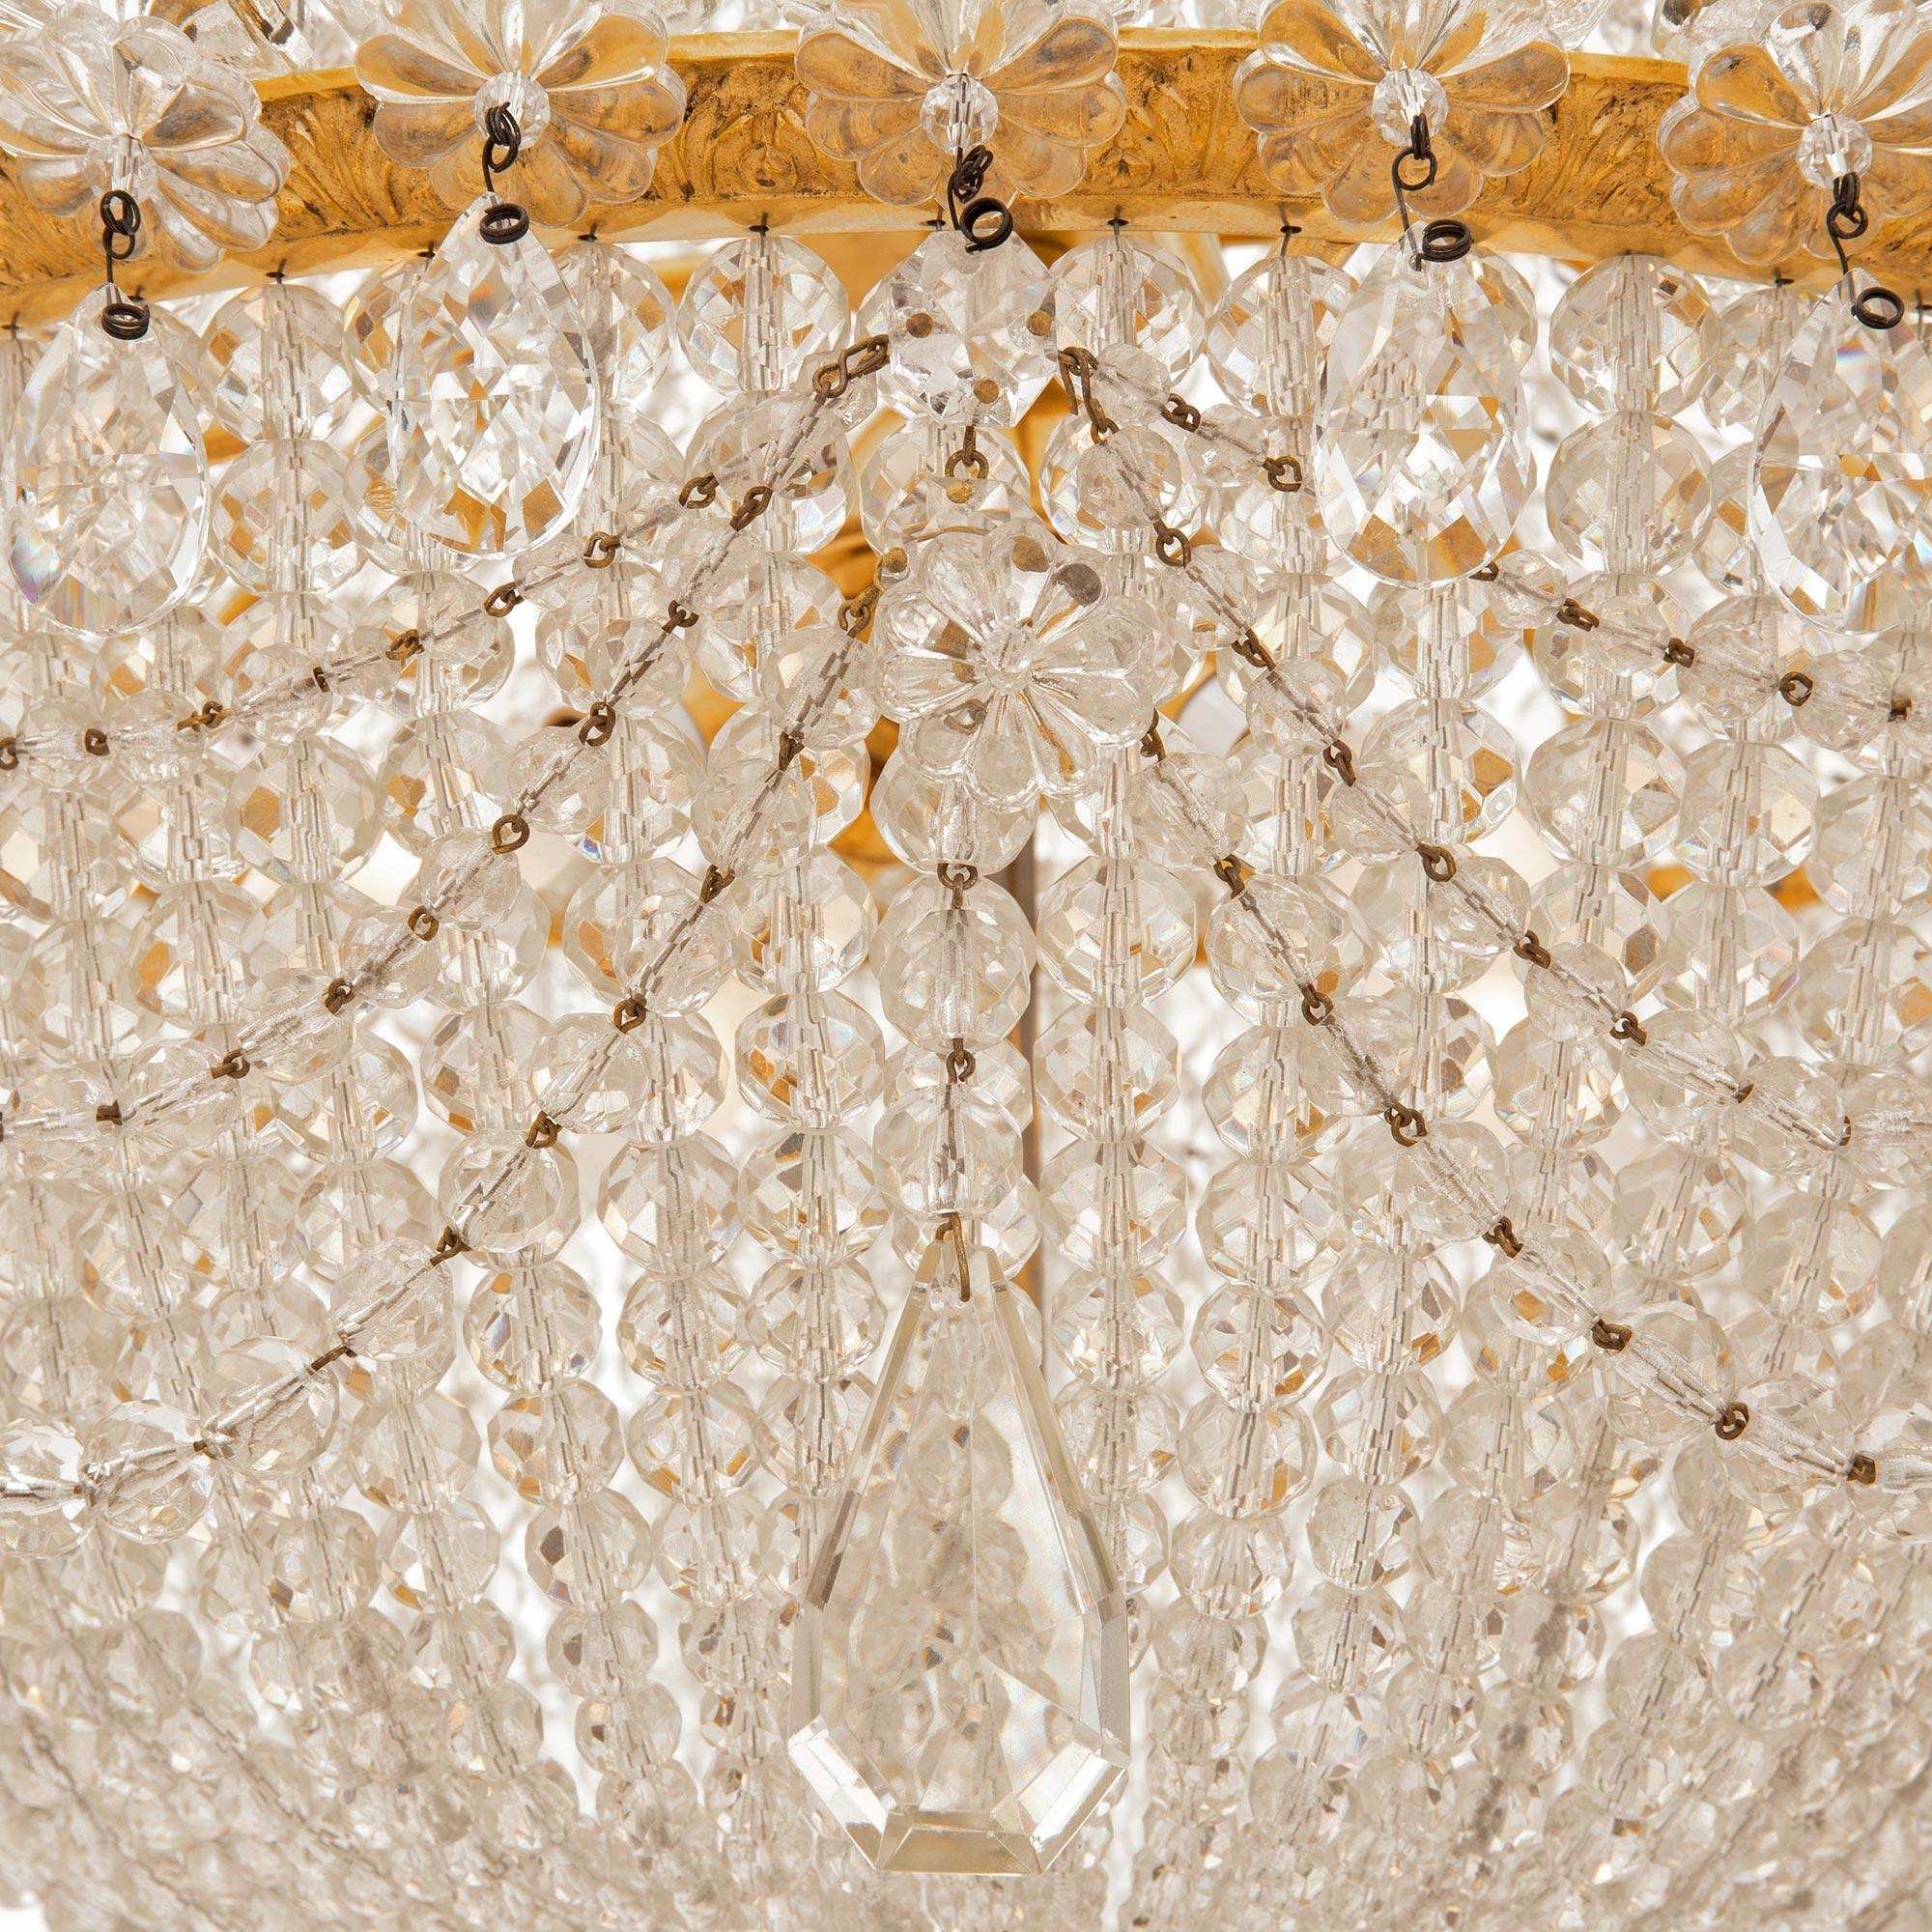 French 19th Century Belle Époque Period Baccarat Crystal and Ormolu Chandelier For Sale 3